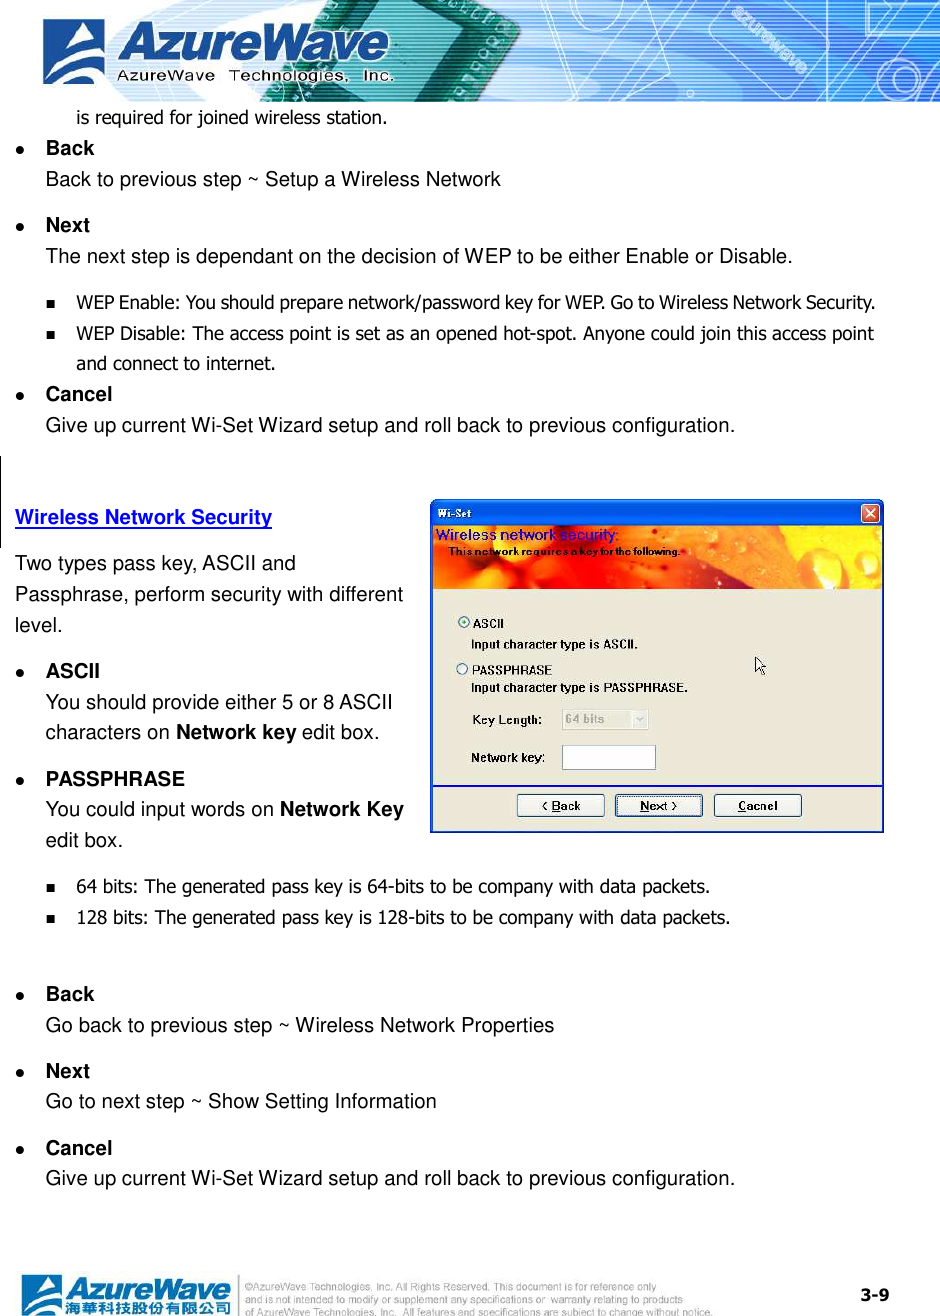  3-9 is required for joined wireless station.  Back Back to previous step ~ Setup a Wireless Network  Next The next step is dependant on the decision of WEP to be either Enable or Disable.  WEP Enable: You should prepare network/password key for WEP. Go to Wireless Network Security.  WEP Disable: The access point is set as an opened hot-spot. Anyone could join this access point and connect to internet.  Cancel Give up current Wi-Set Wizard setup and roll back to previous configuration.    Wireless Network Security Two types pass key, ASCII and Passphrase, perform security with different level.  ASCII You should provide either 5 or 8 ASCII characters on Network key edit box.  PASSPHRASE You could input words on Network Key edit box.  64 bits: The generated pass key is 64-bits to be company with data packets.  128 bits: The generated pass key is 128-bits to be company with data packets.   Back Go back to previous step ~ Wireless Network Properties  Next Go to next step ~ Show Setting Information  Cancel Give up current Wi-Set Wizard setup and roll back to previous configuration.    